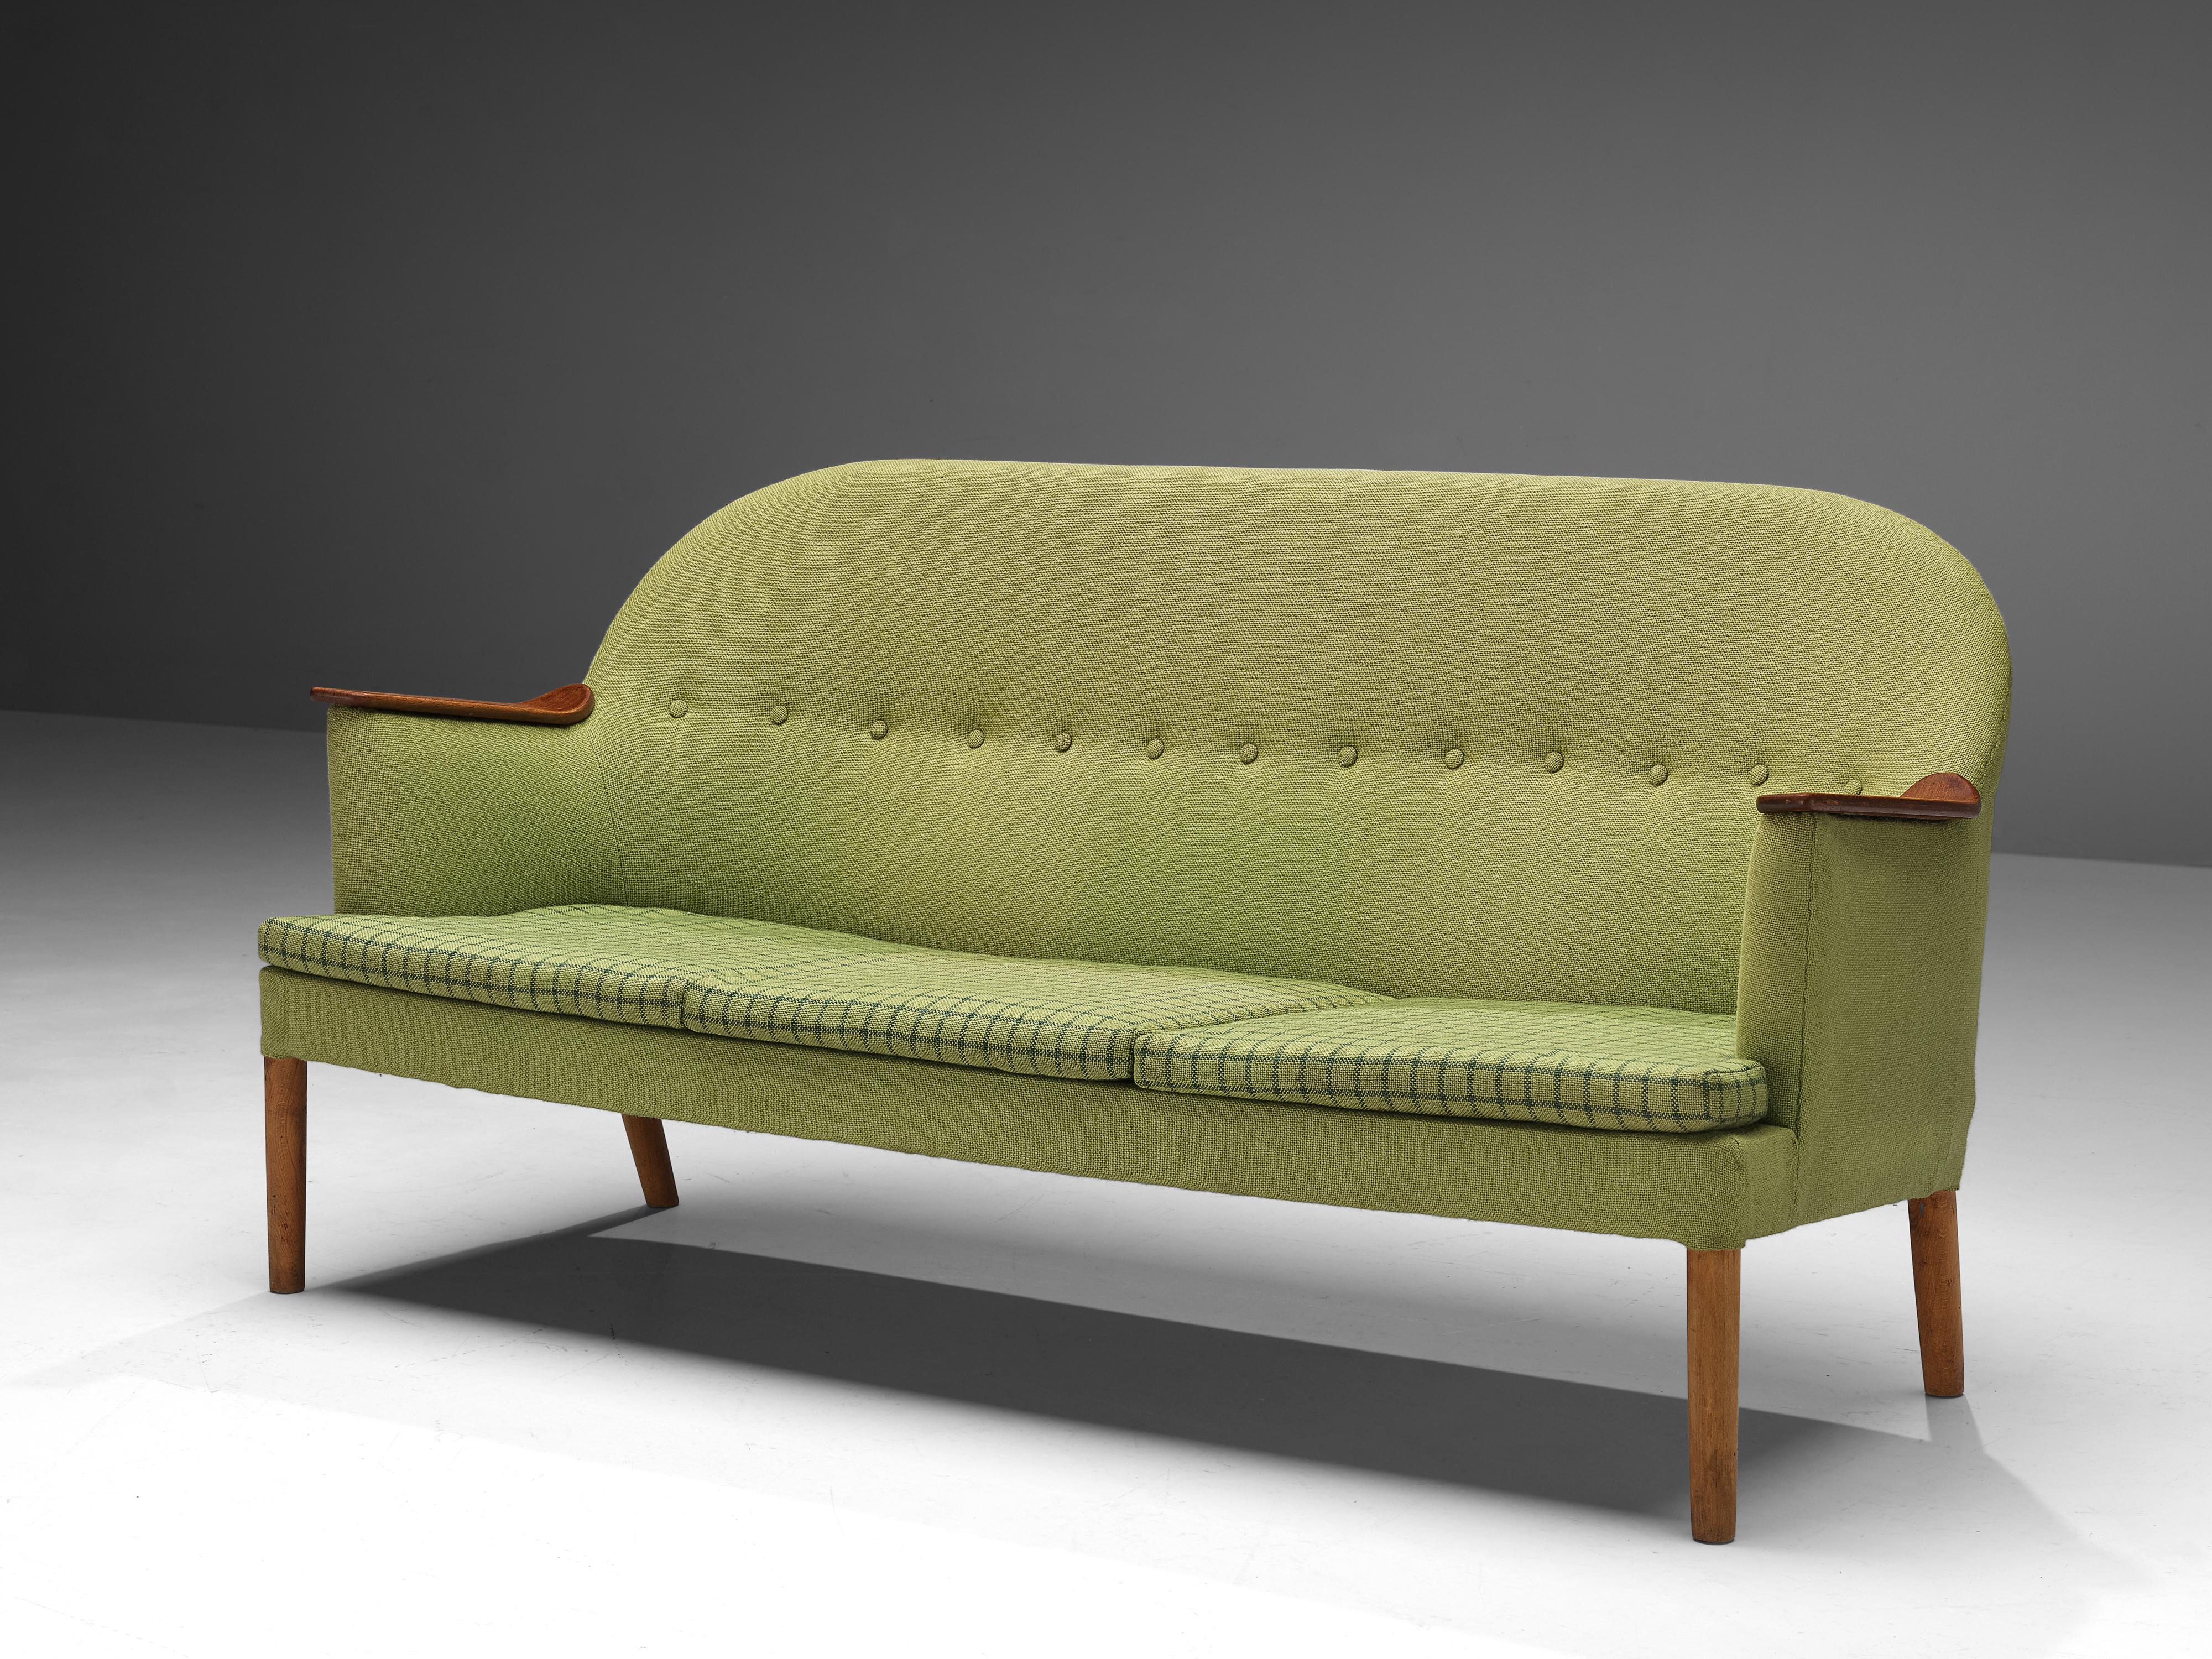 Sofa, fabric, teak, Scandinavia, 1950s

This understated sofa is an iconic example of Scandinavian design from the 1950s. Organic and sculptural, this sofa is anything but minimalistic. Equipped with conical-shaped feet that gradually diverge, give